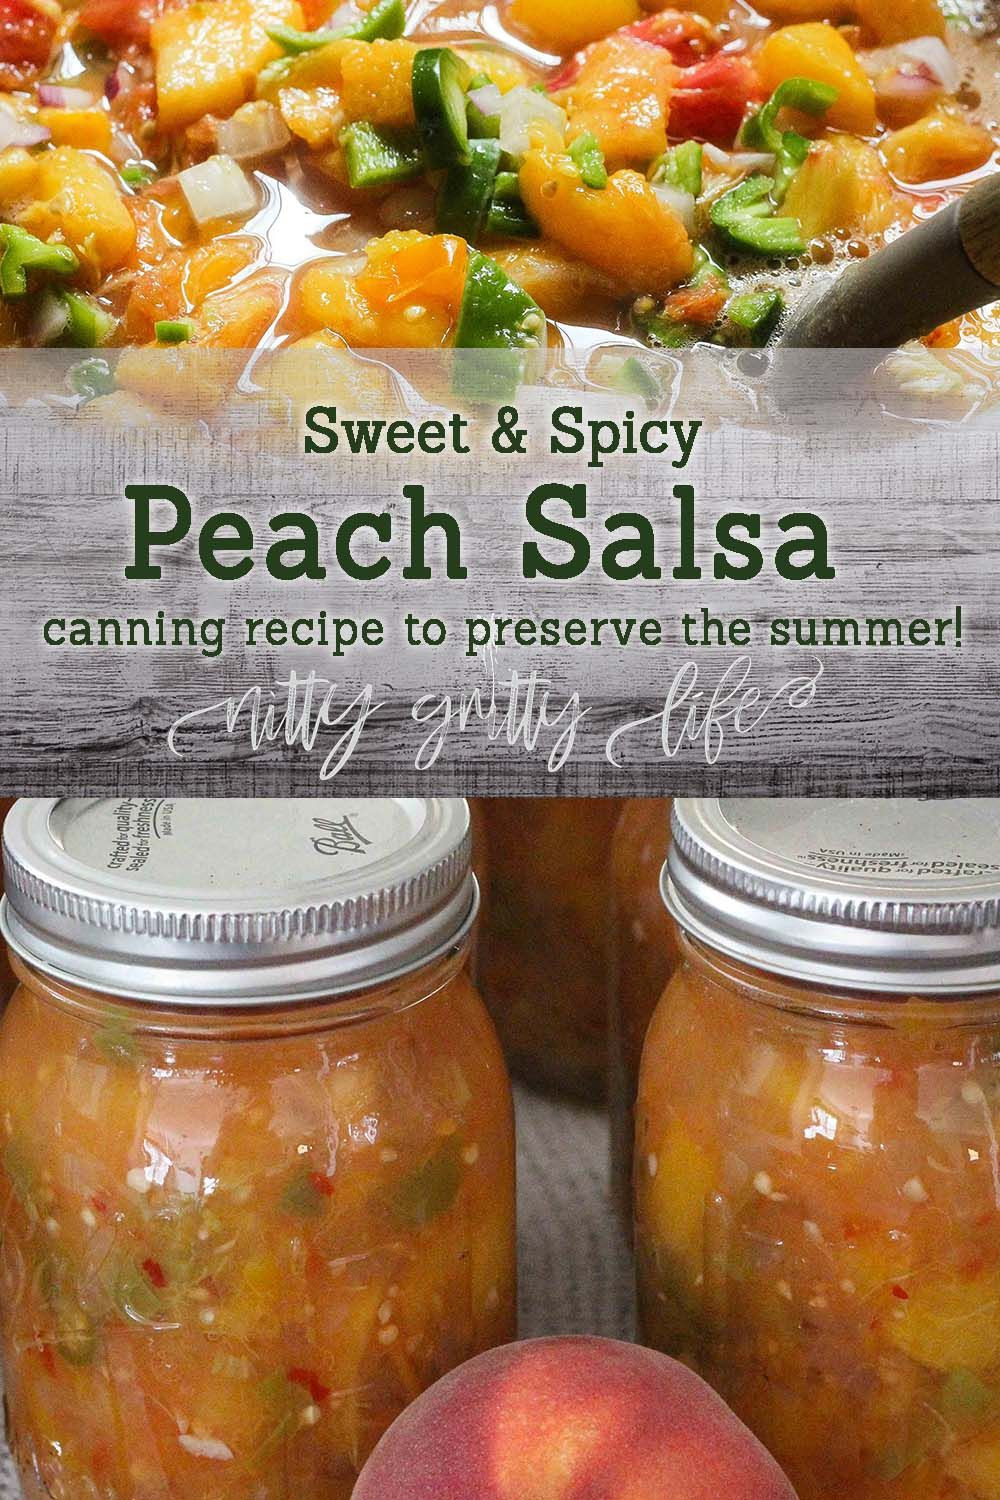 Hot Salsa Recipe For Canning
 Sweet & Spicy Peach Salsa Canning Recipe